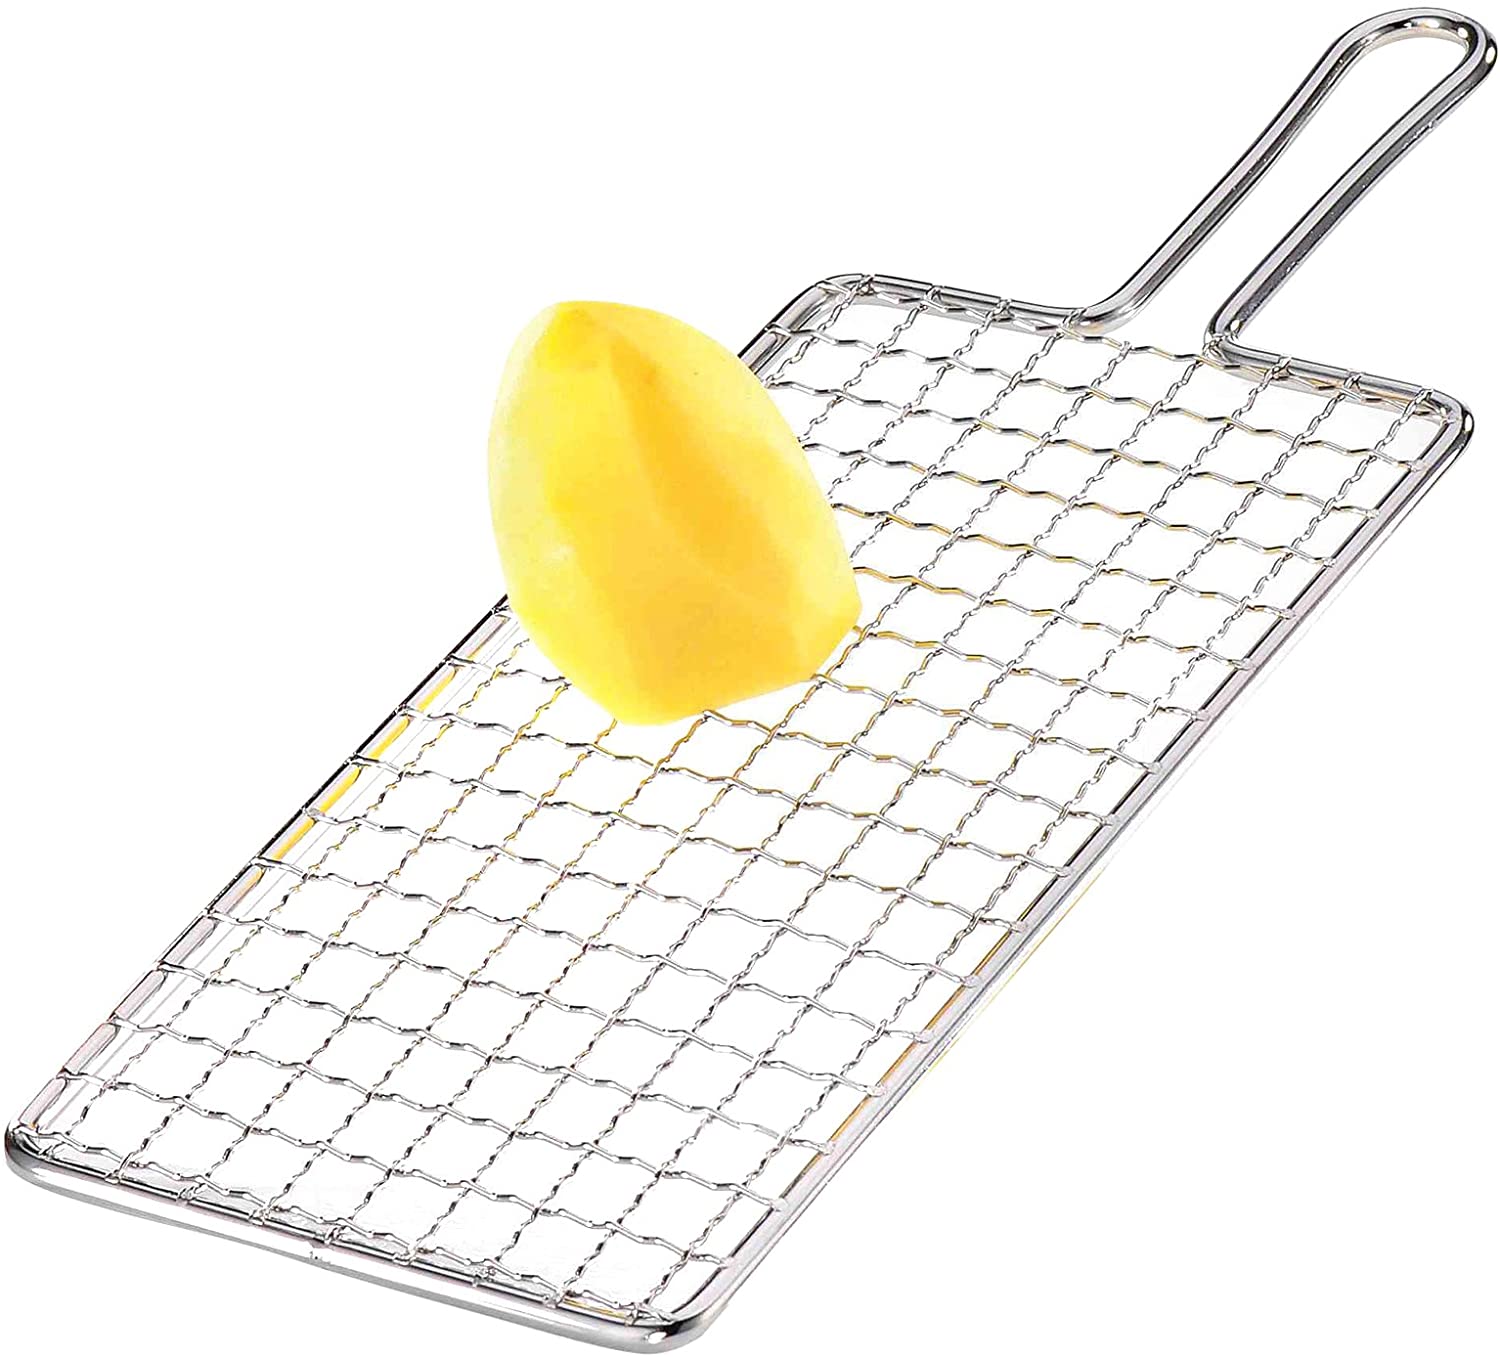 Gefu Wire Potato Grater Rustica, Accessories for Vegetables, Stainless Steel, 50110